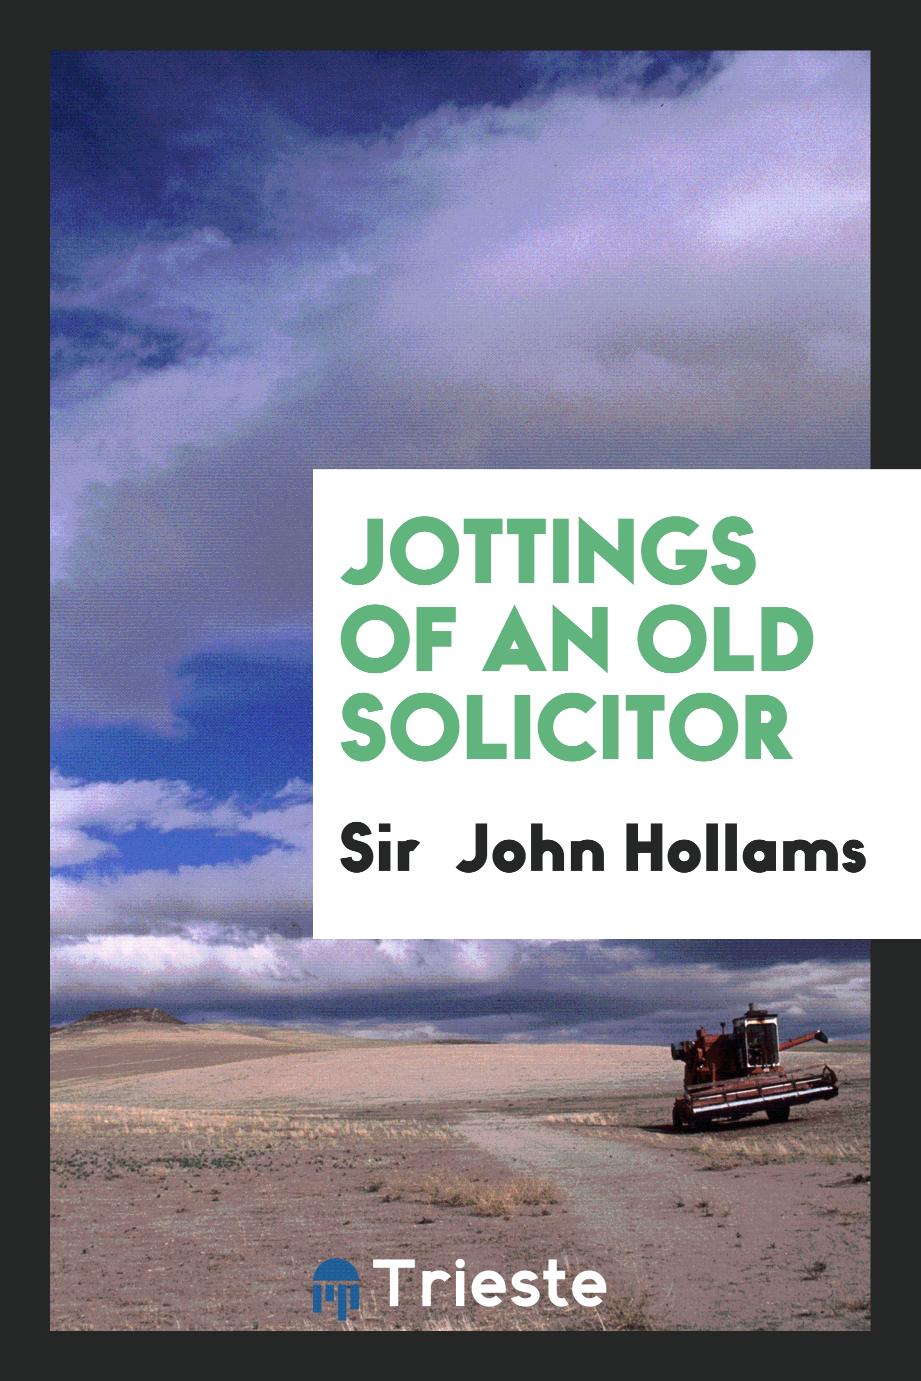 Jottings of an old solicitor